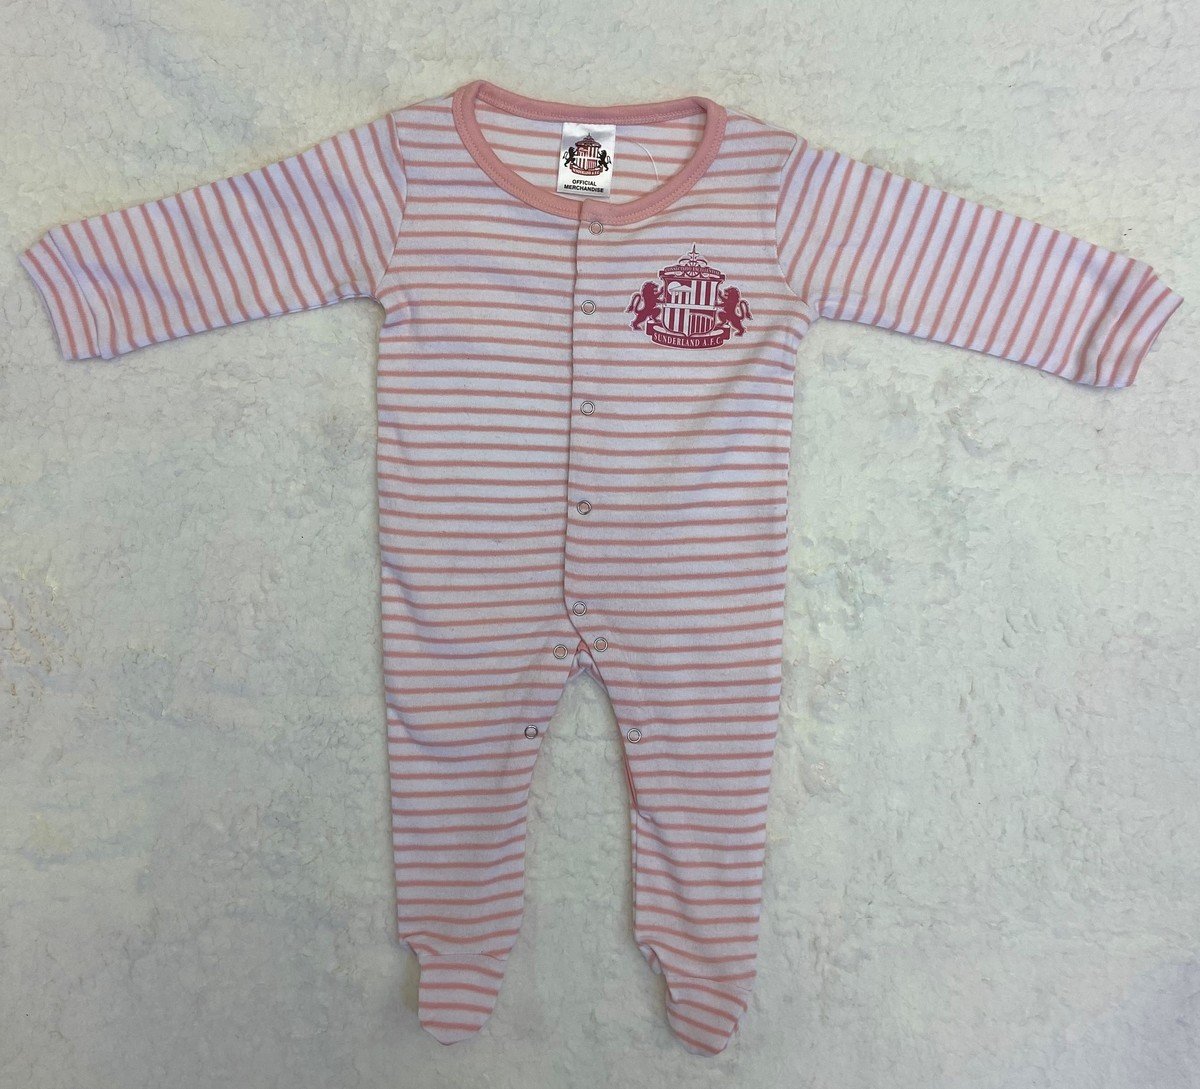 Buy the SAFC Baby Sleepsuit online at Sunderland AFC Store